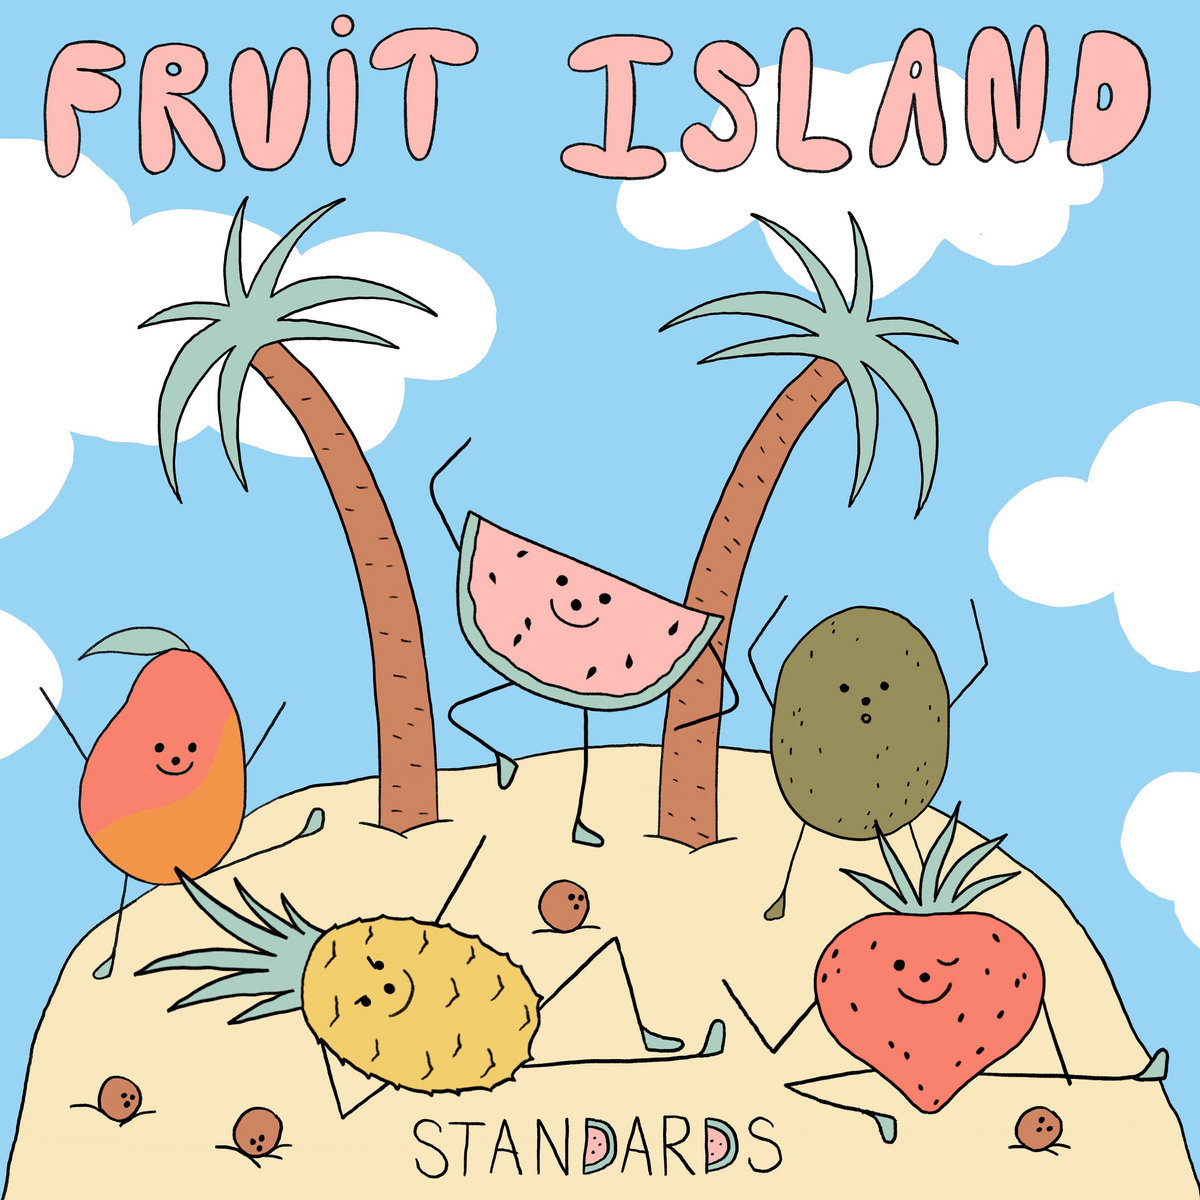 Album cover: A colorful sketch of five different anthropomorpic fruit dancing on a tropical island